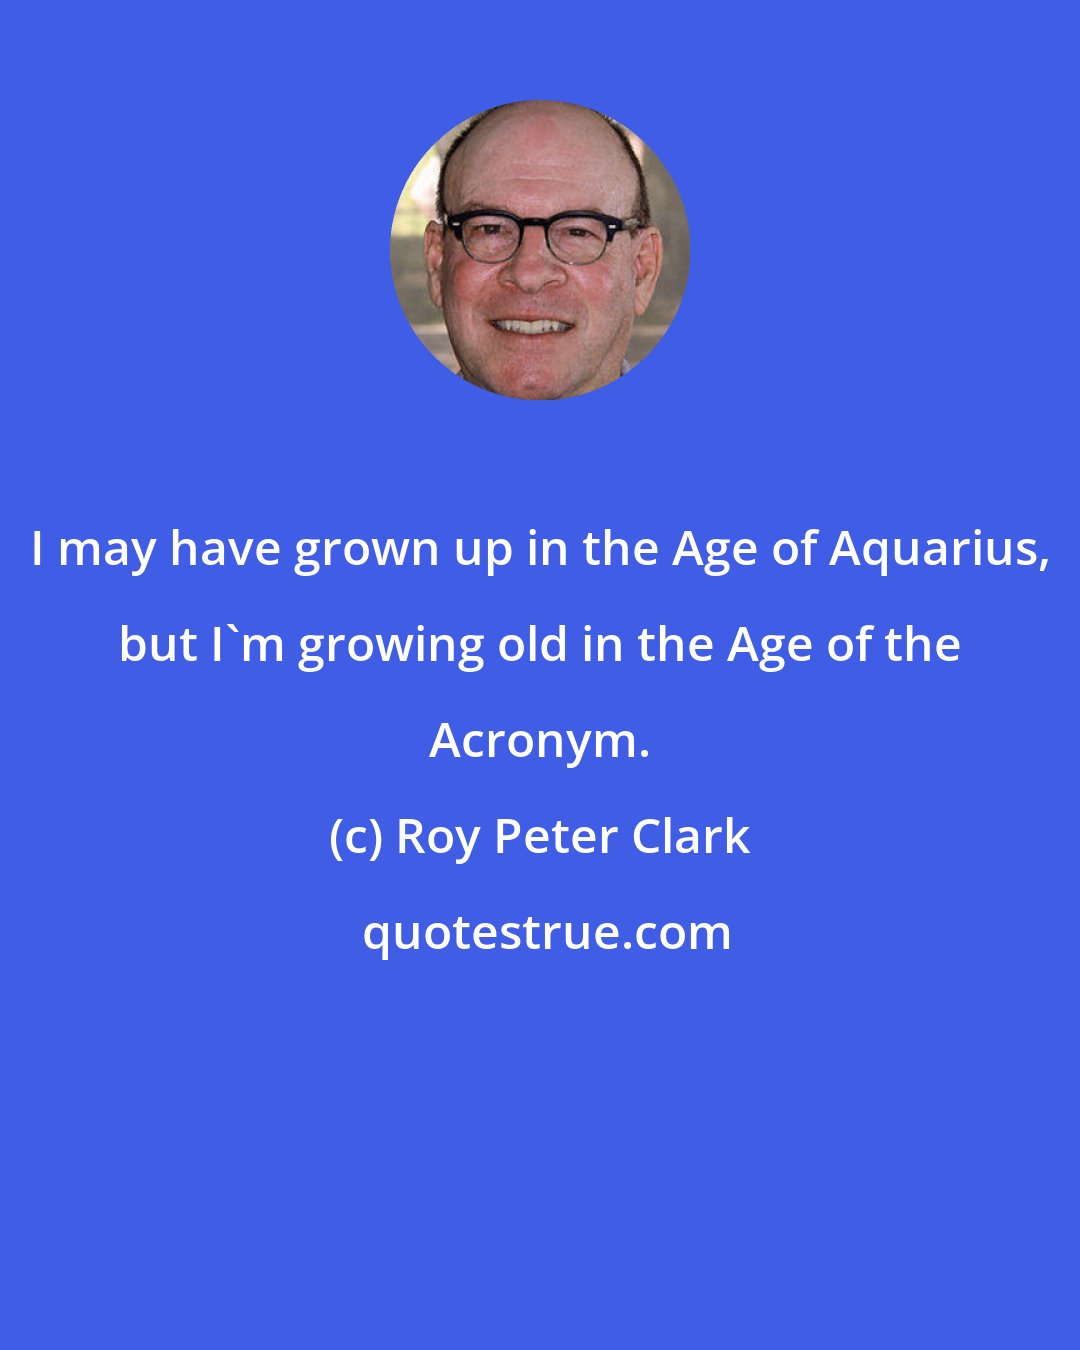 Roy Peter Clark: I may have grown up in the Age of Aquarius, but I'm growing old in the Age of the Acronym.